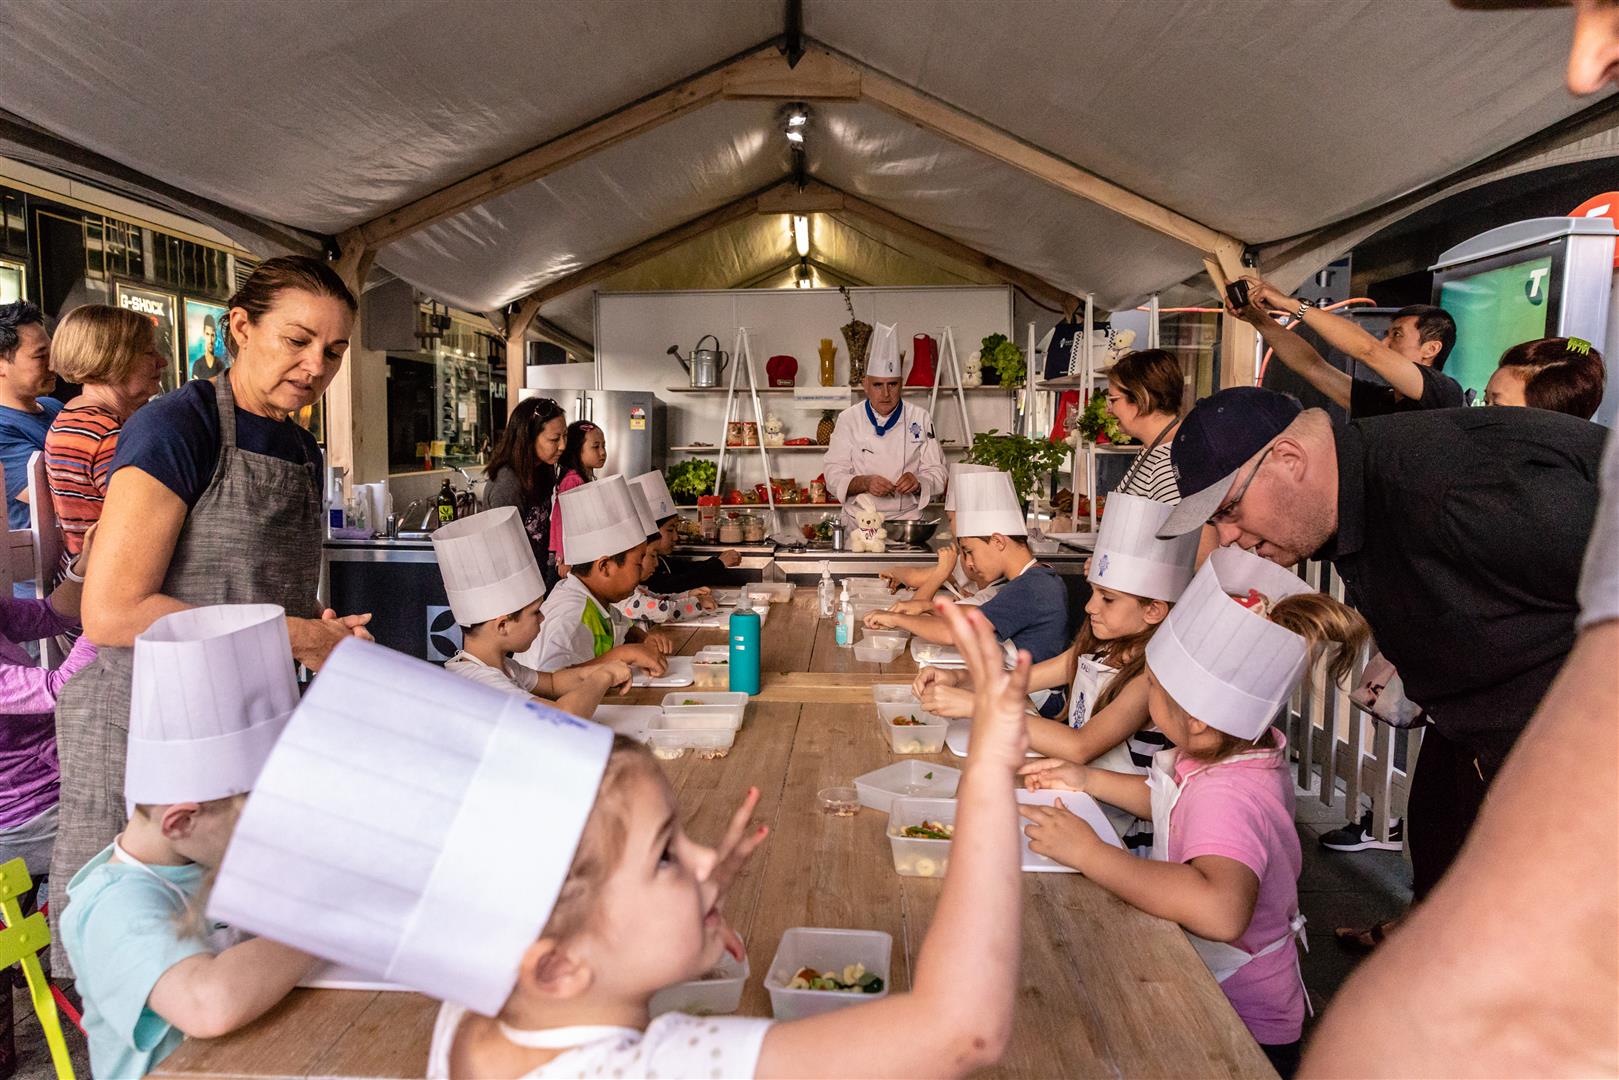 Master chefs inspire young foodies at Tasting Australia